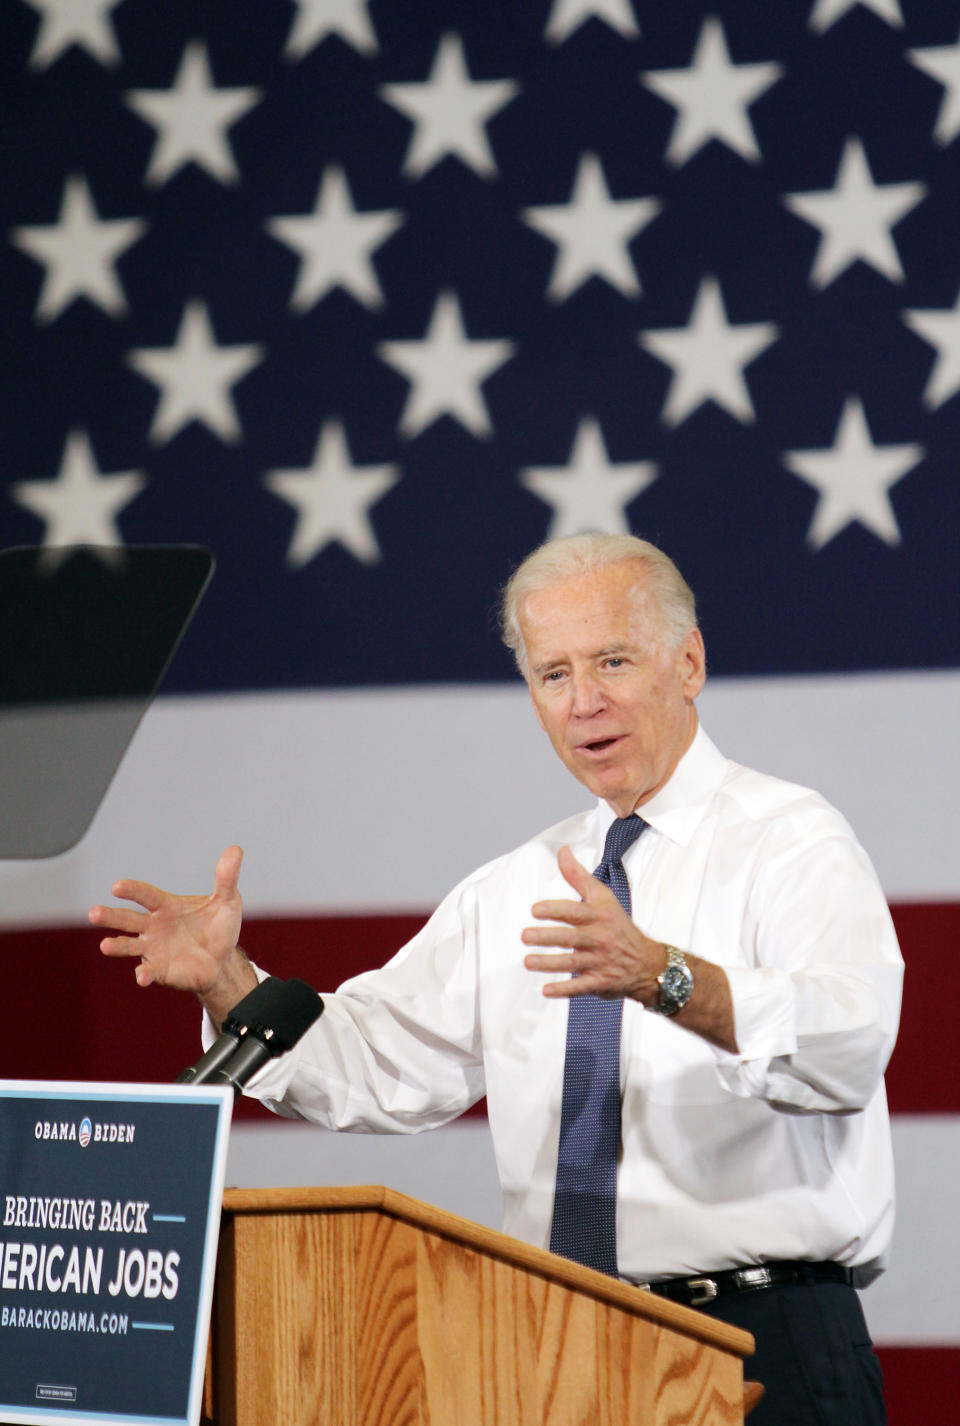 Vice President Joe Biden speaks to supporters during a campaign speech at PCT Engineered Systems in Davenport, Iowa on Wednesday March 28, 2012. (AP Photo/The Quad City Times, Kevin E. Schmidt)